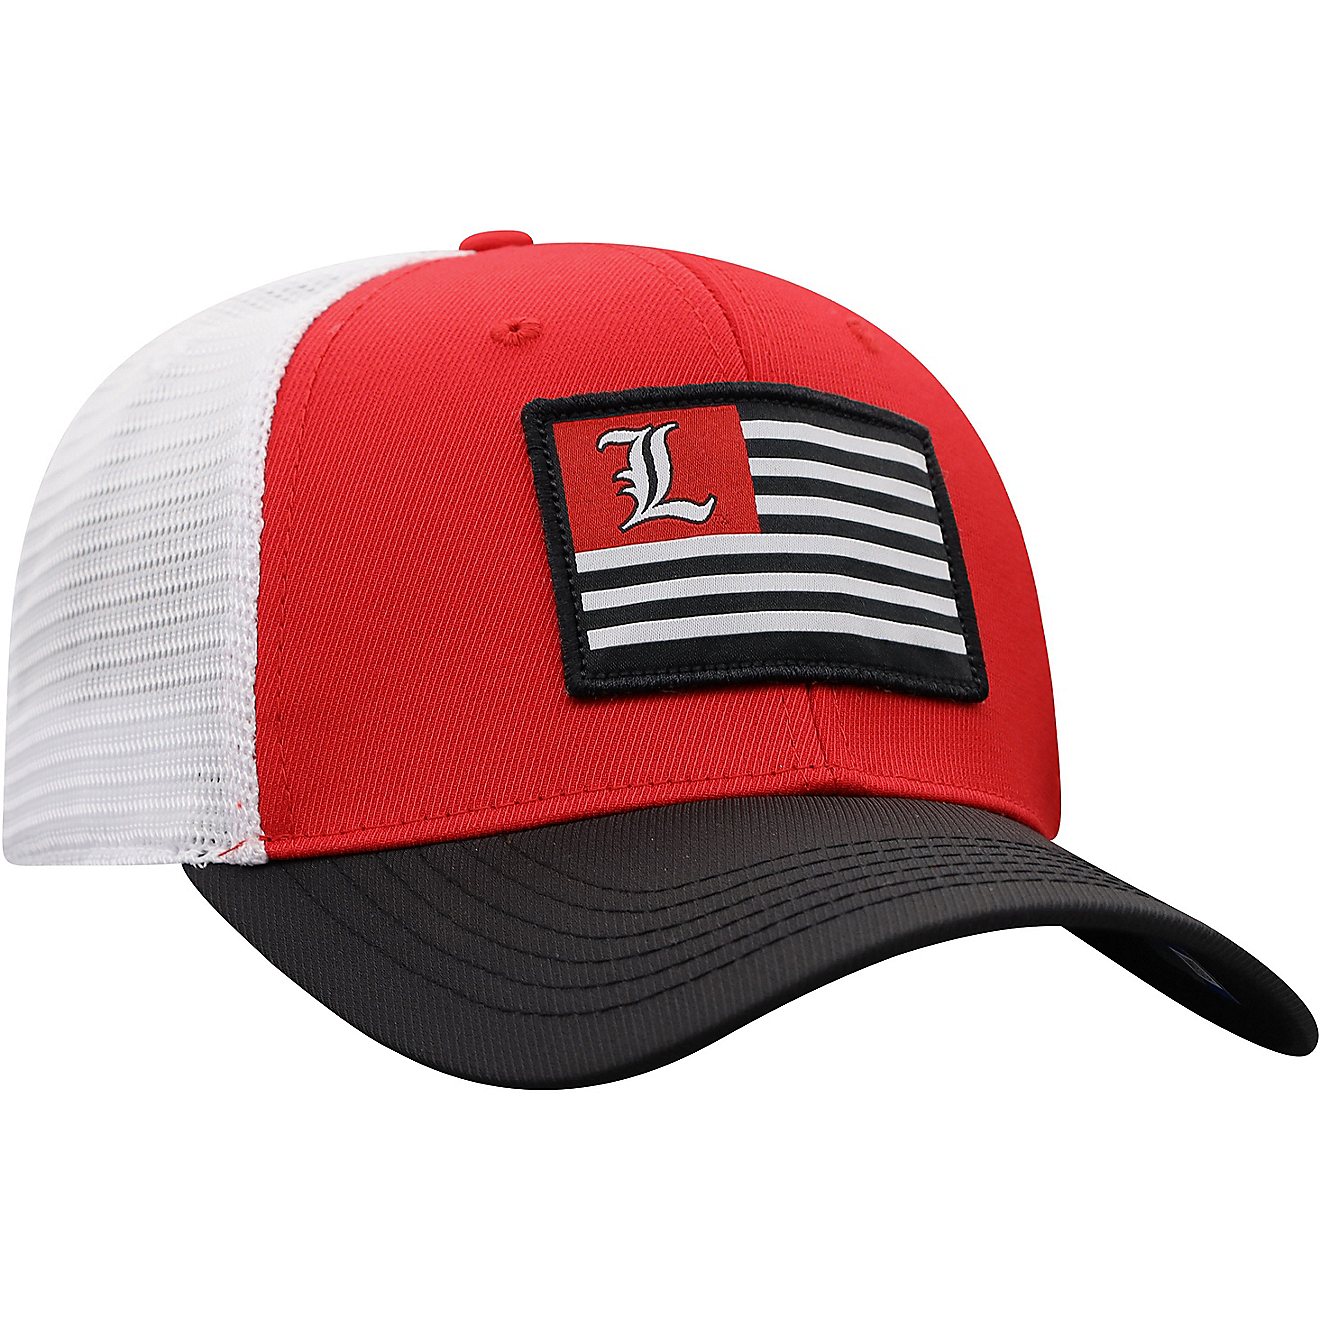 Top of the World University of Louisville Pedigree 1 Fit Cap                                                                     - view number 4